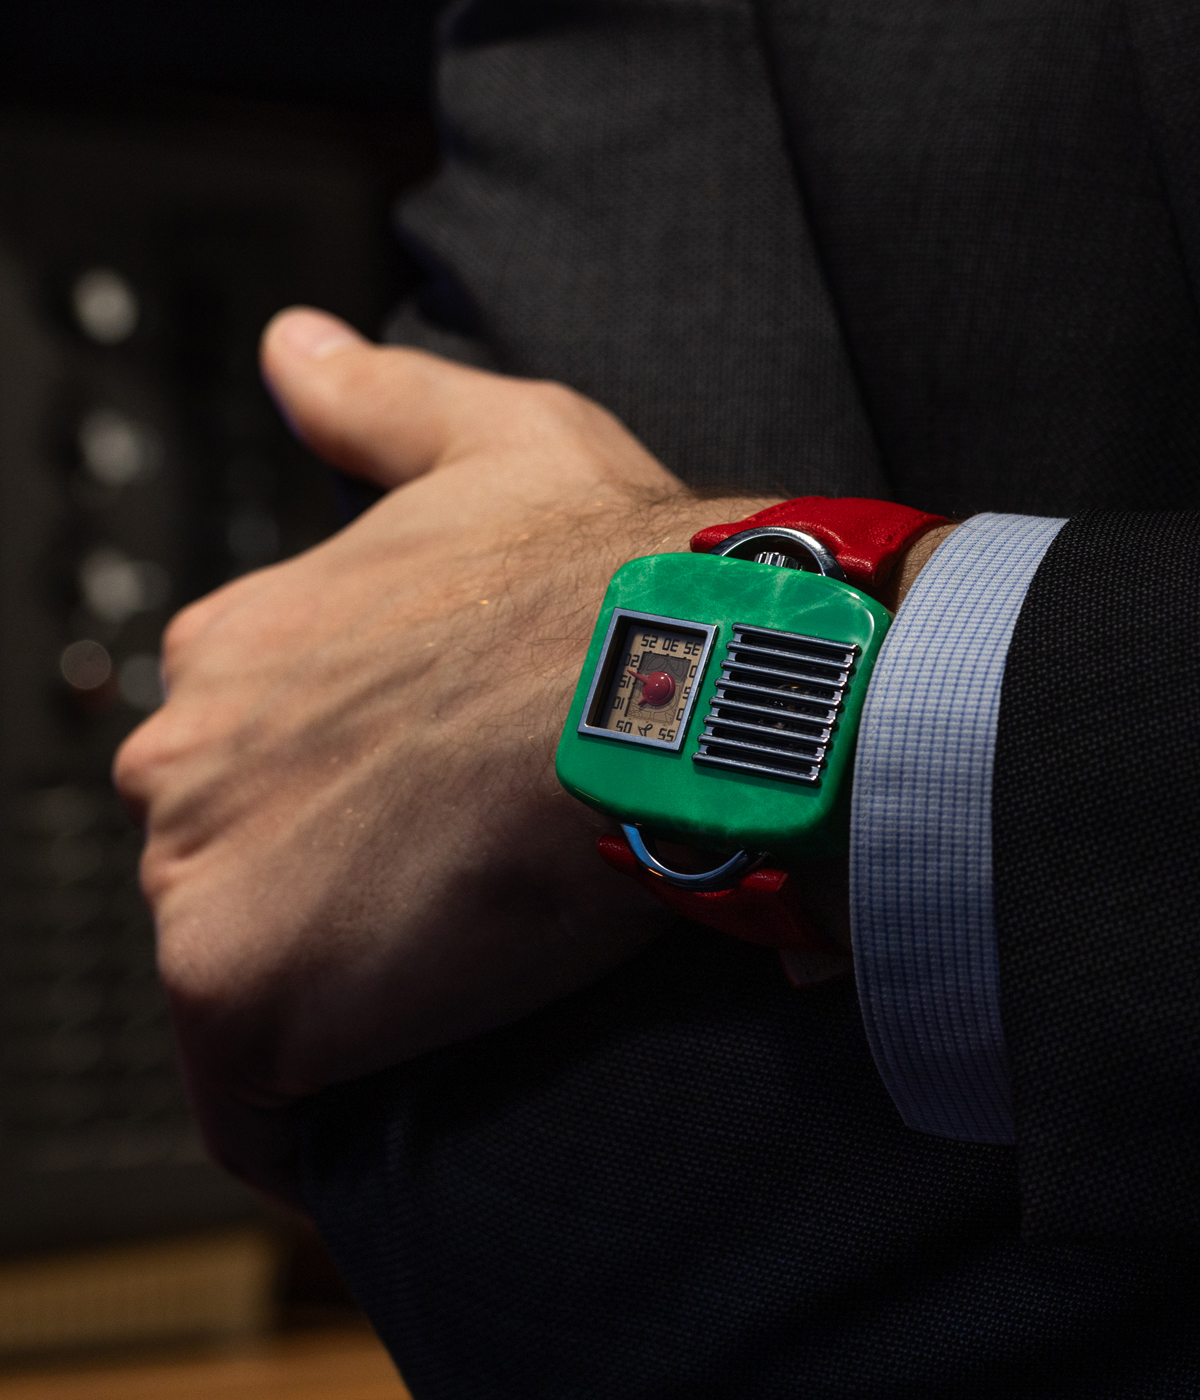 Green futuristic watch with red strap, seen on wrist